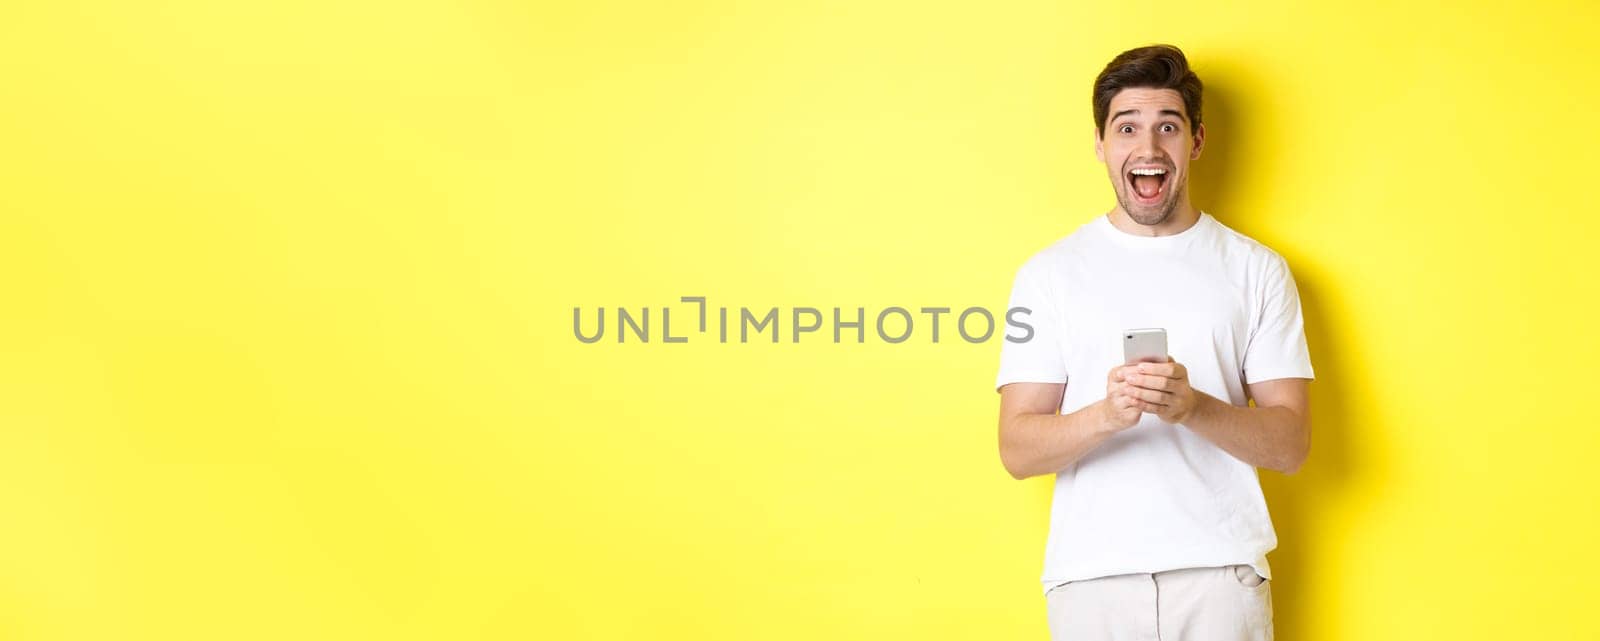 Man looking amazed and happy after reading something on mobile phone, standing over yellow background. Copy space